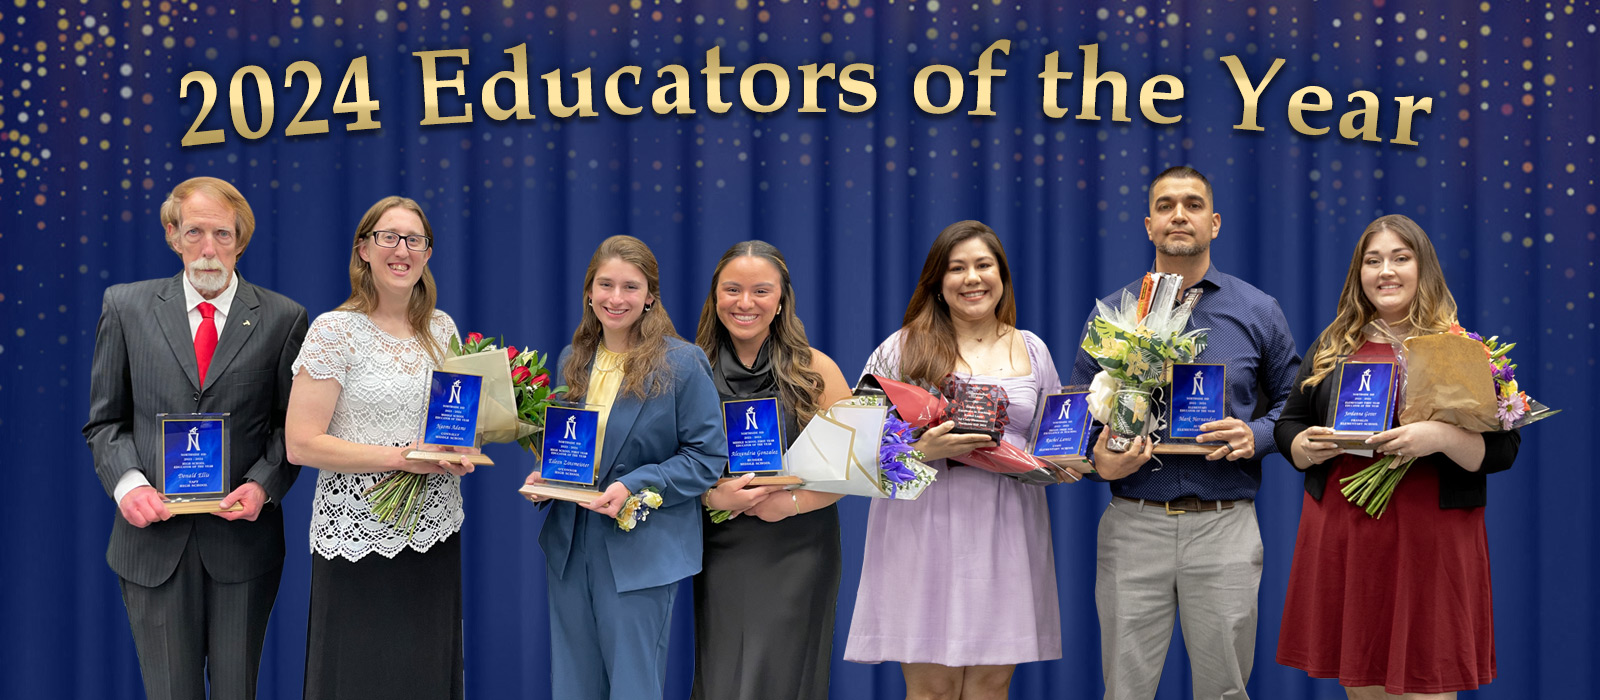  announces 2024 District Educators of the Year